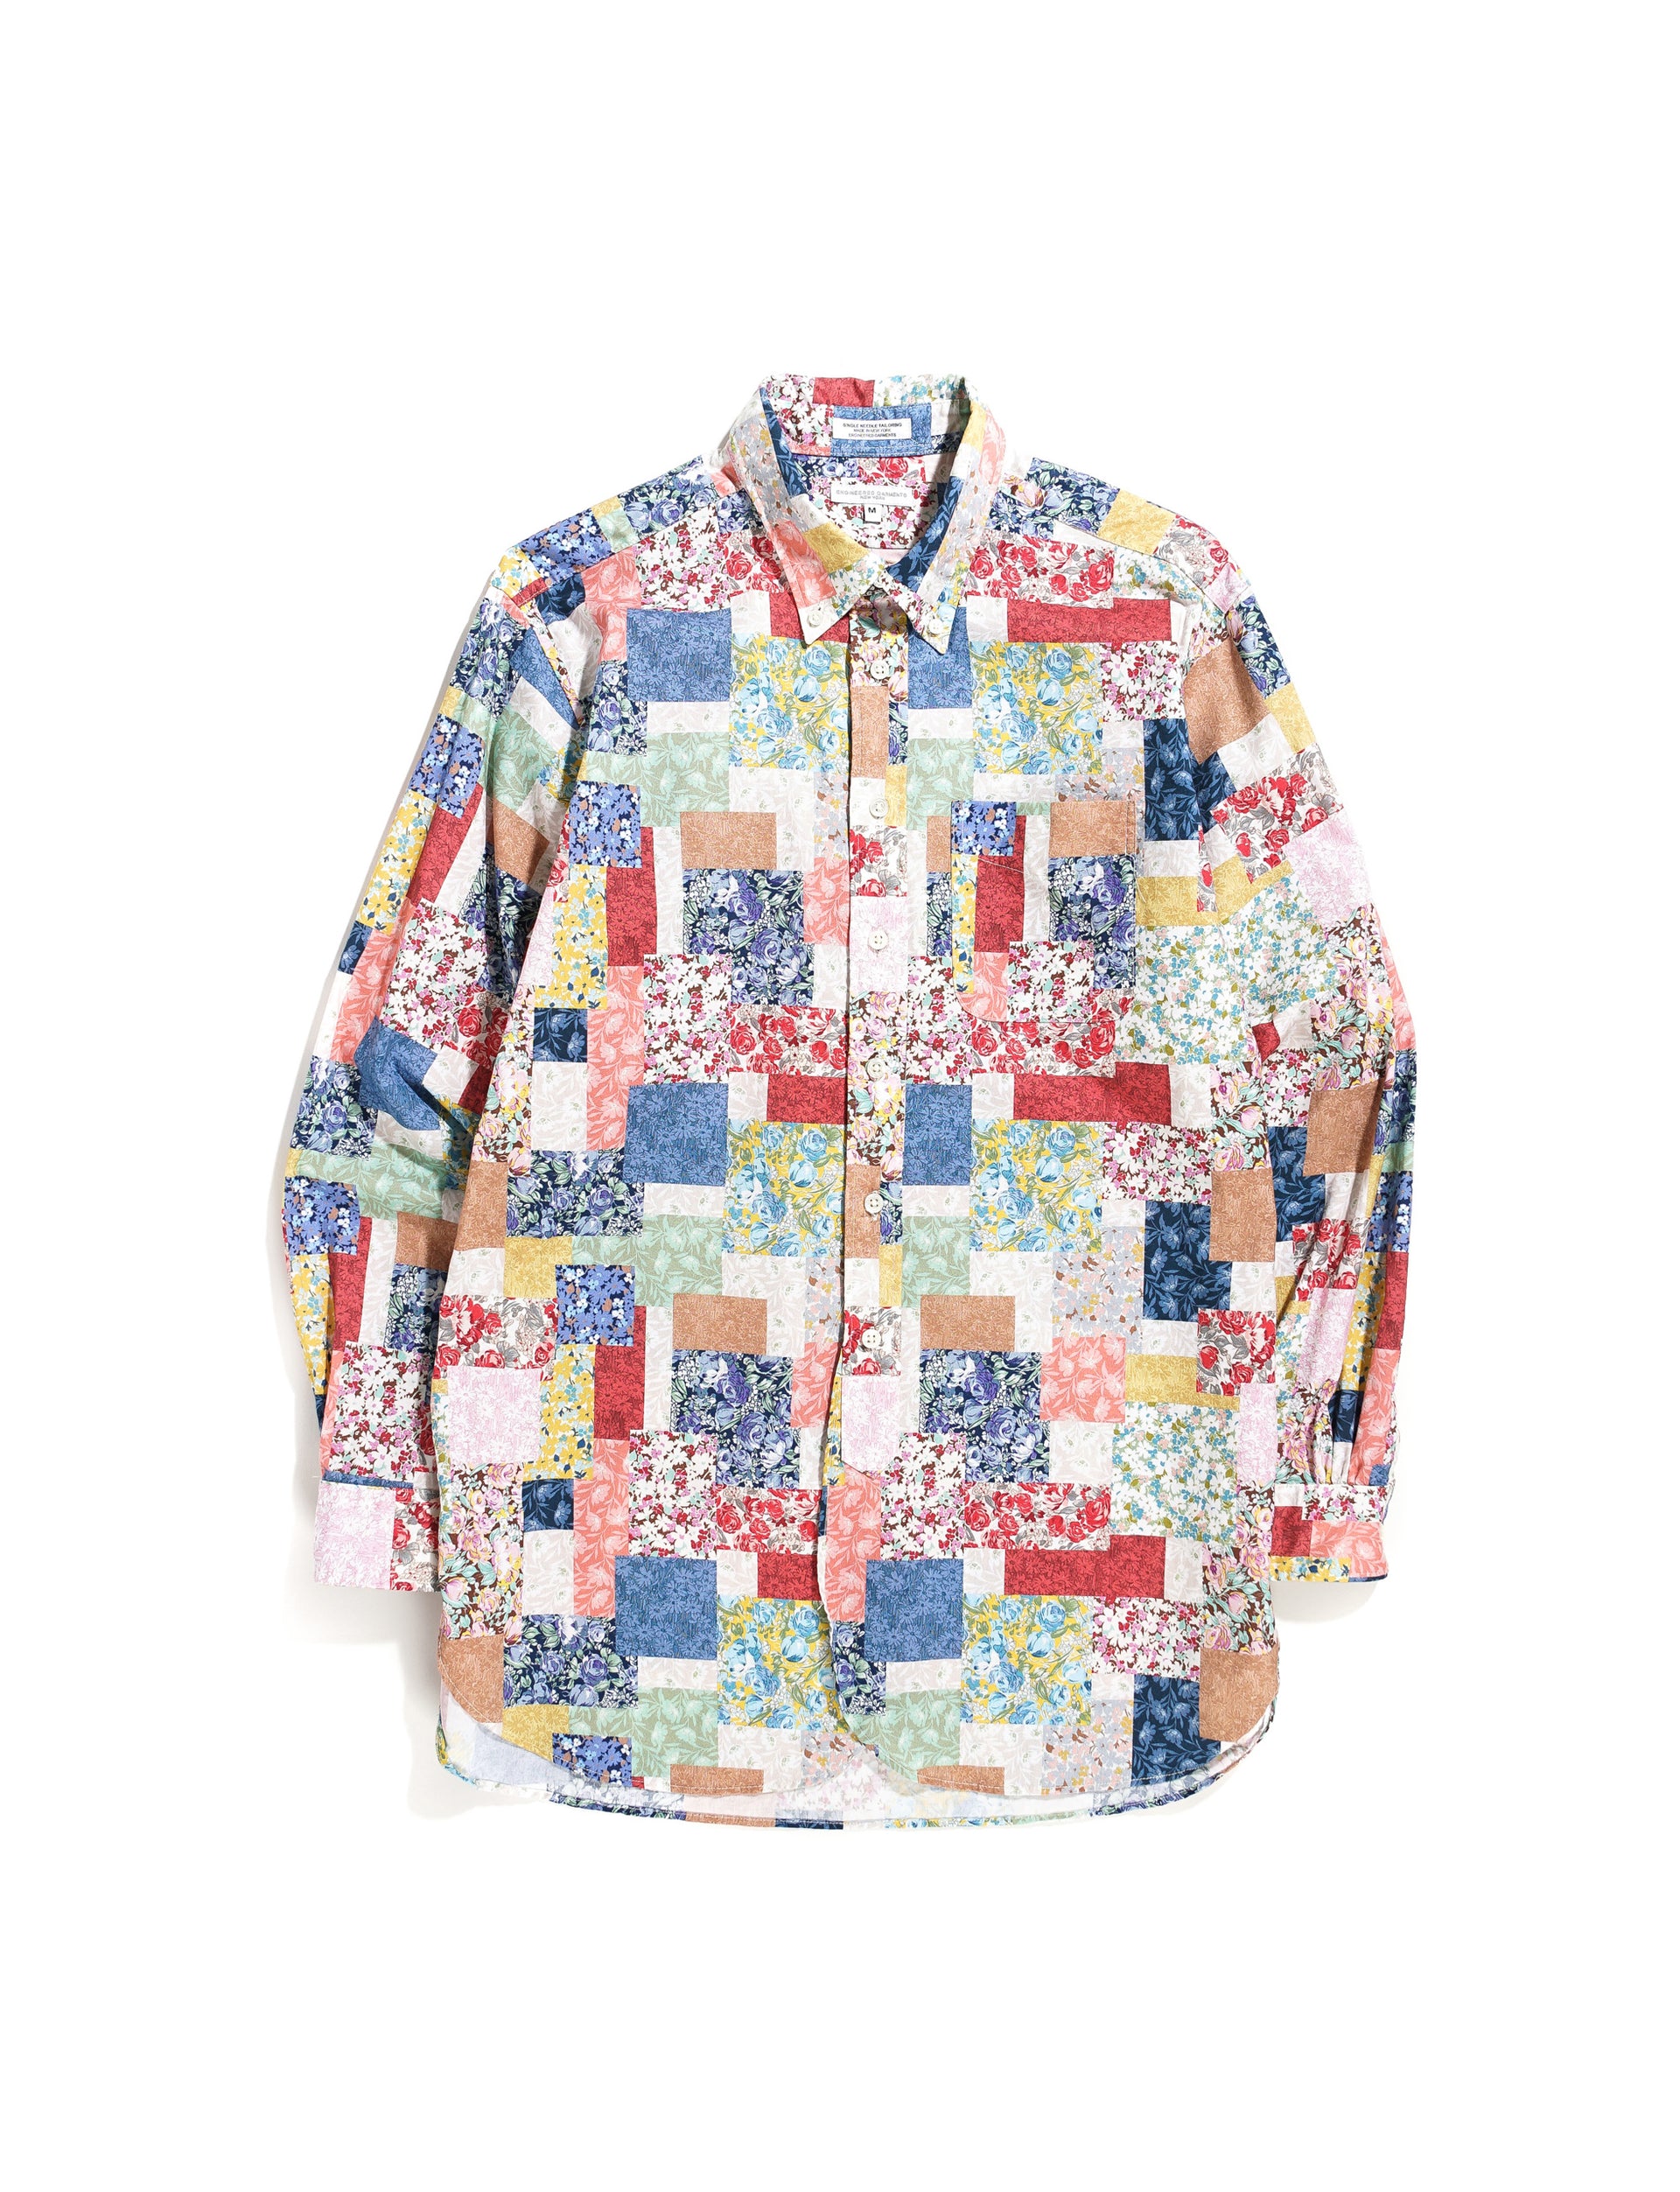 ENGINEERED GARMENTS 19 Century BD Shirt Multi Color Floral Patchwork